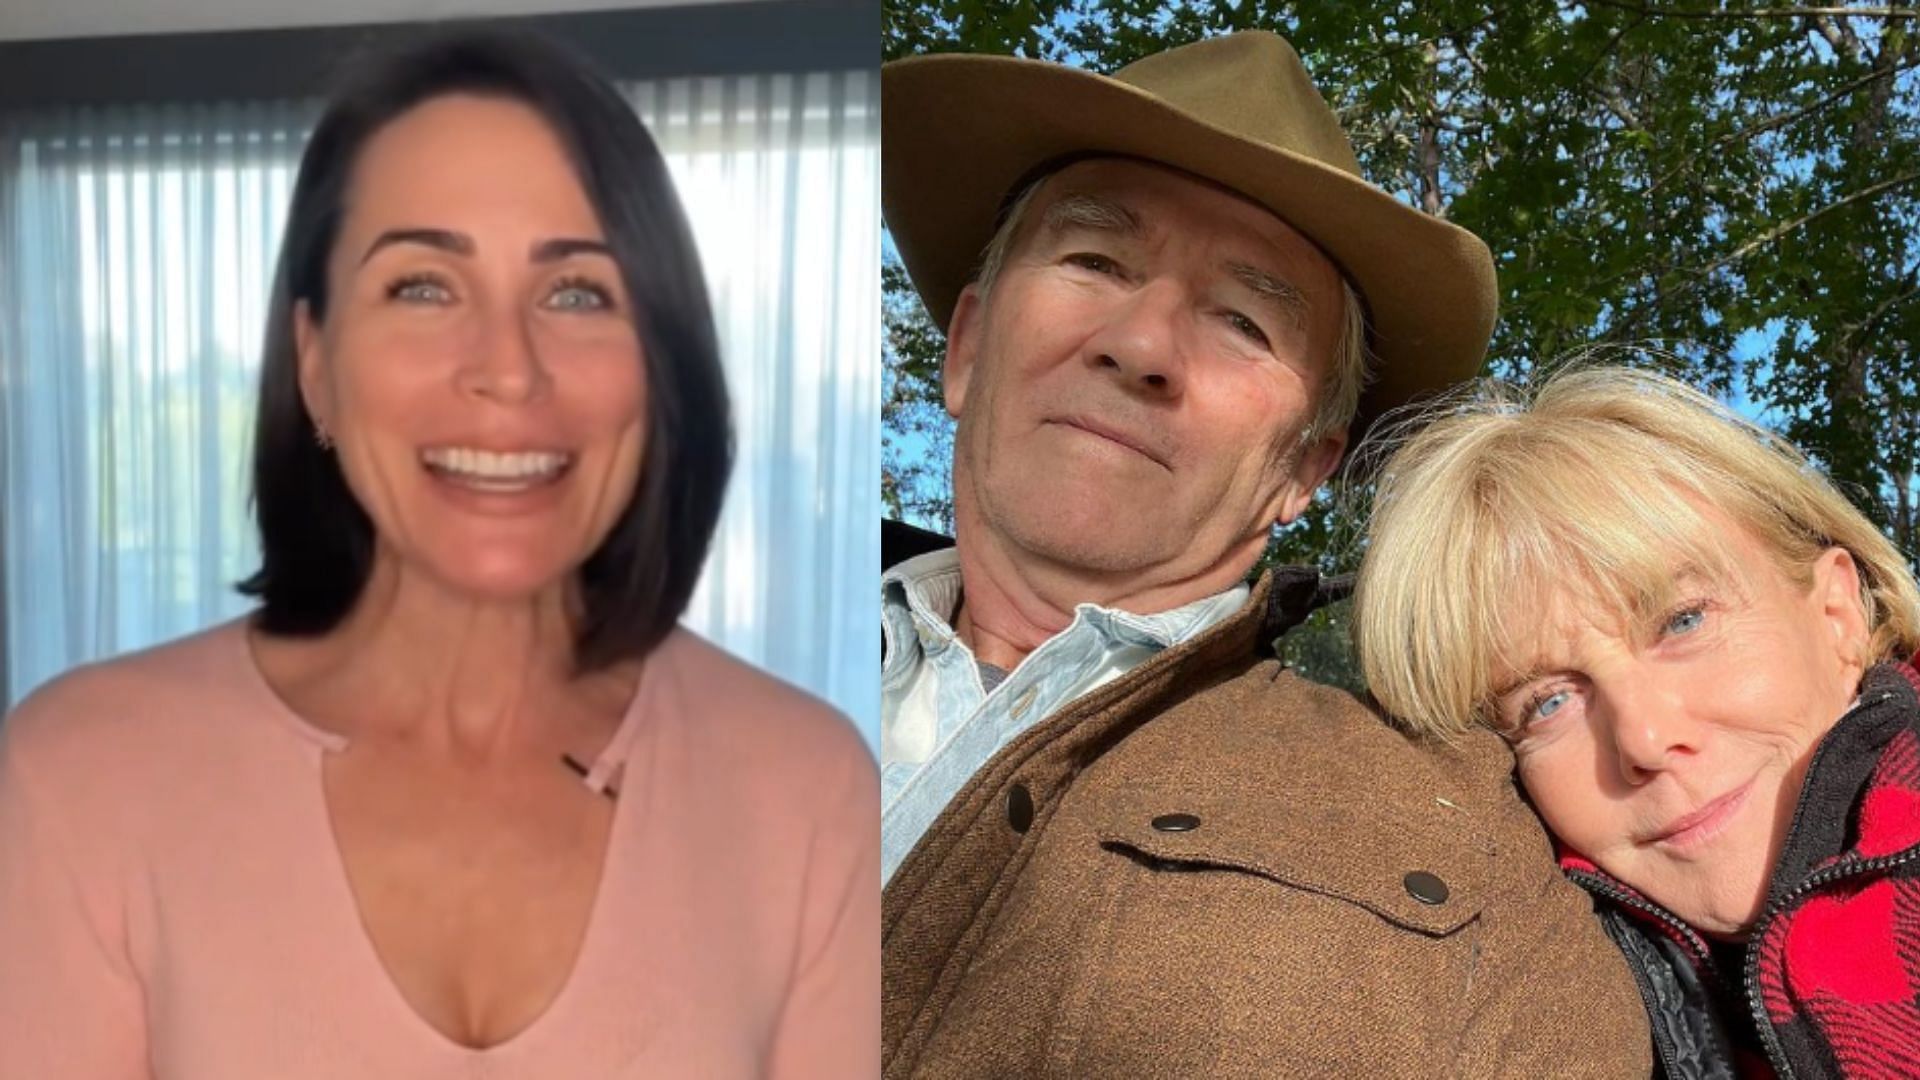 Rena (L) left and real-life couple Patrick and Linda (R) joined the show (Image via Instagram/@rena.sofer and @therealpduffy)